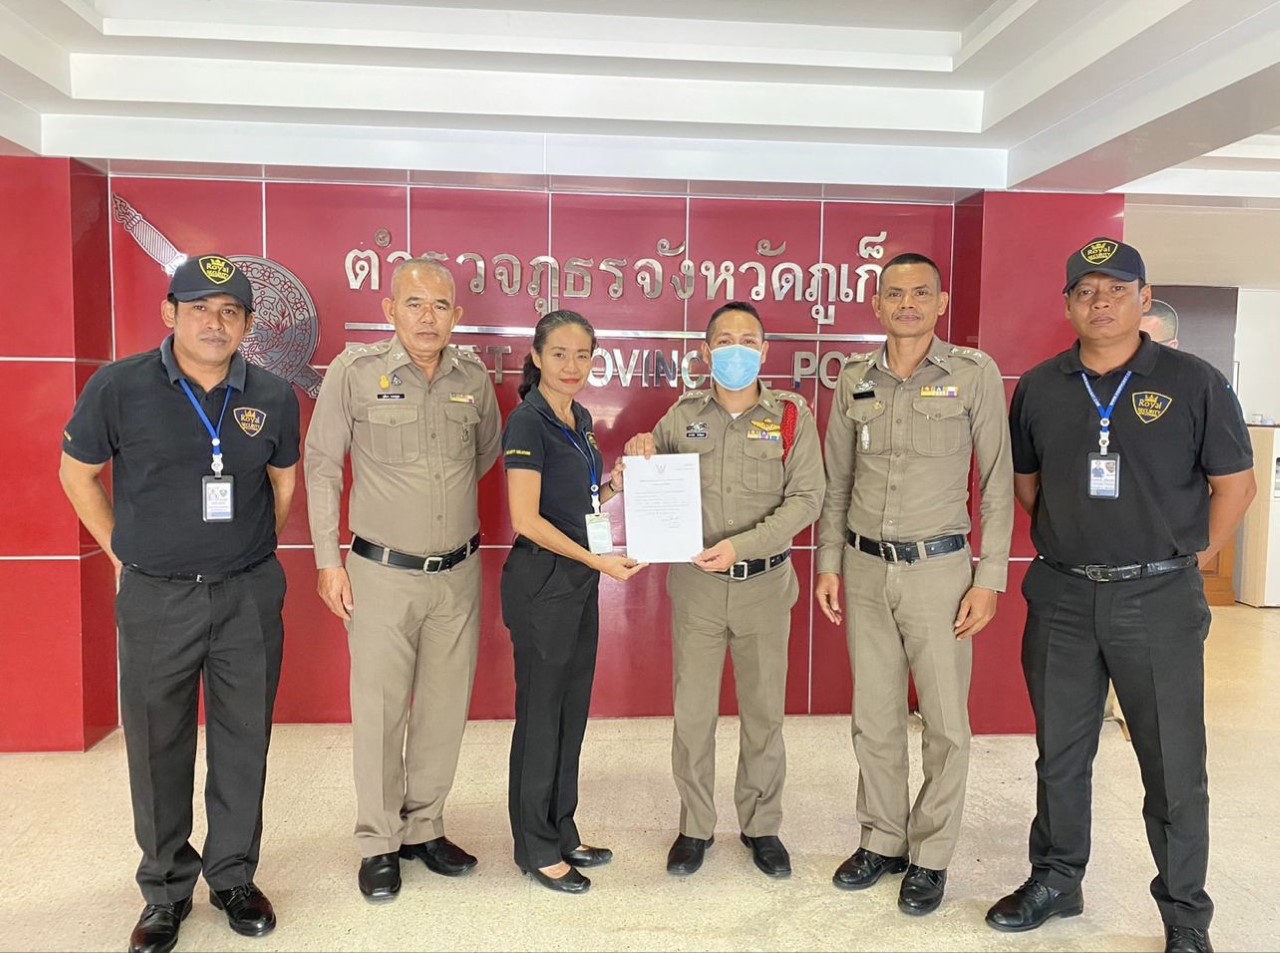 Royal Security Solutions Ltd is a duly registered and licensed security training center in Thailand,